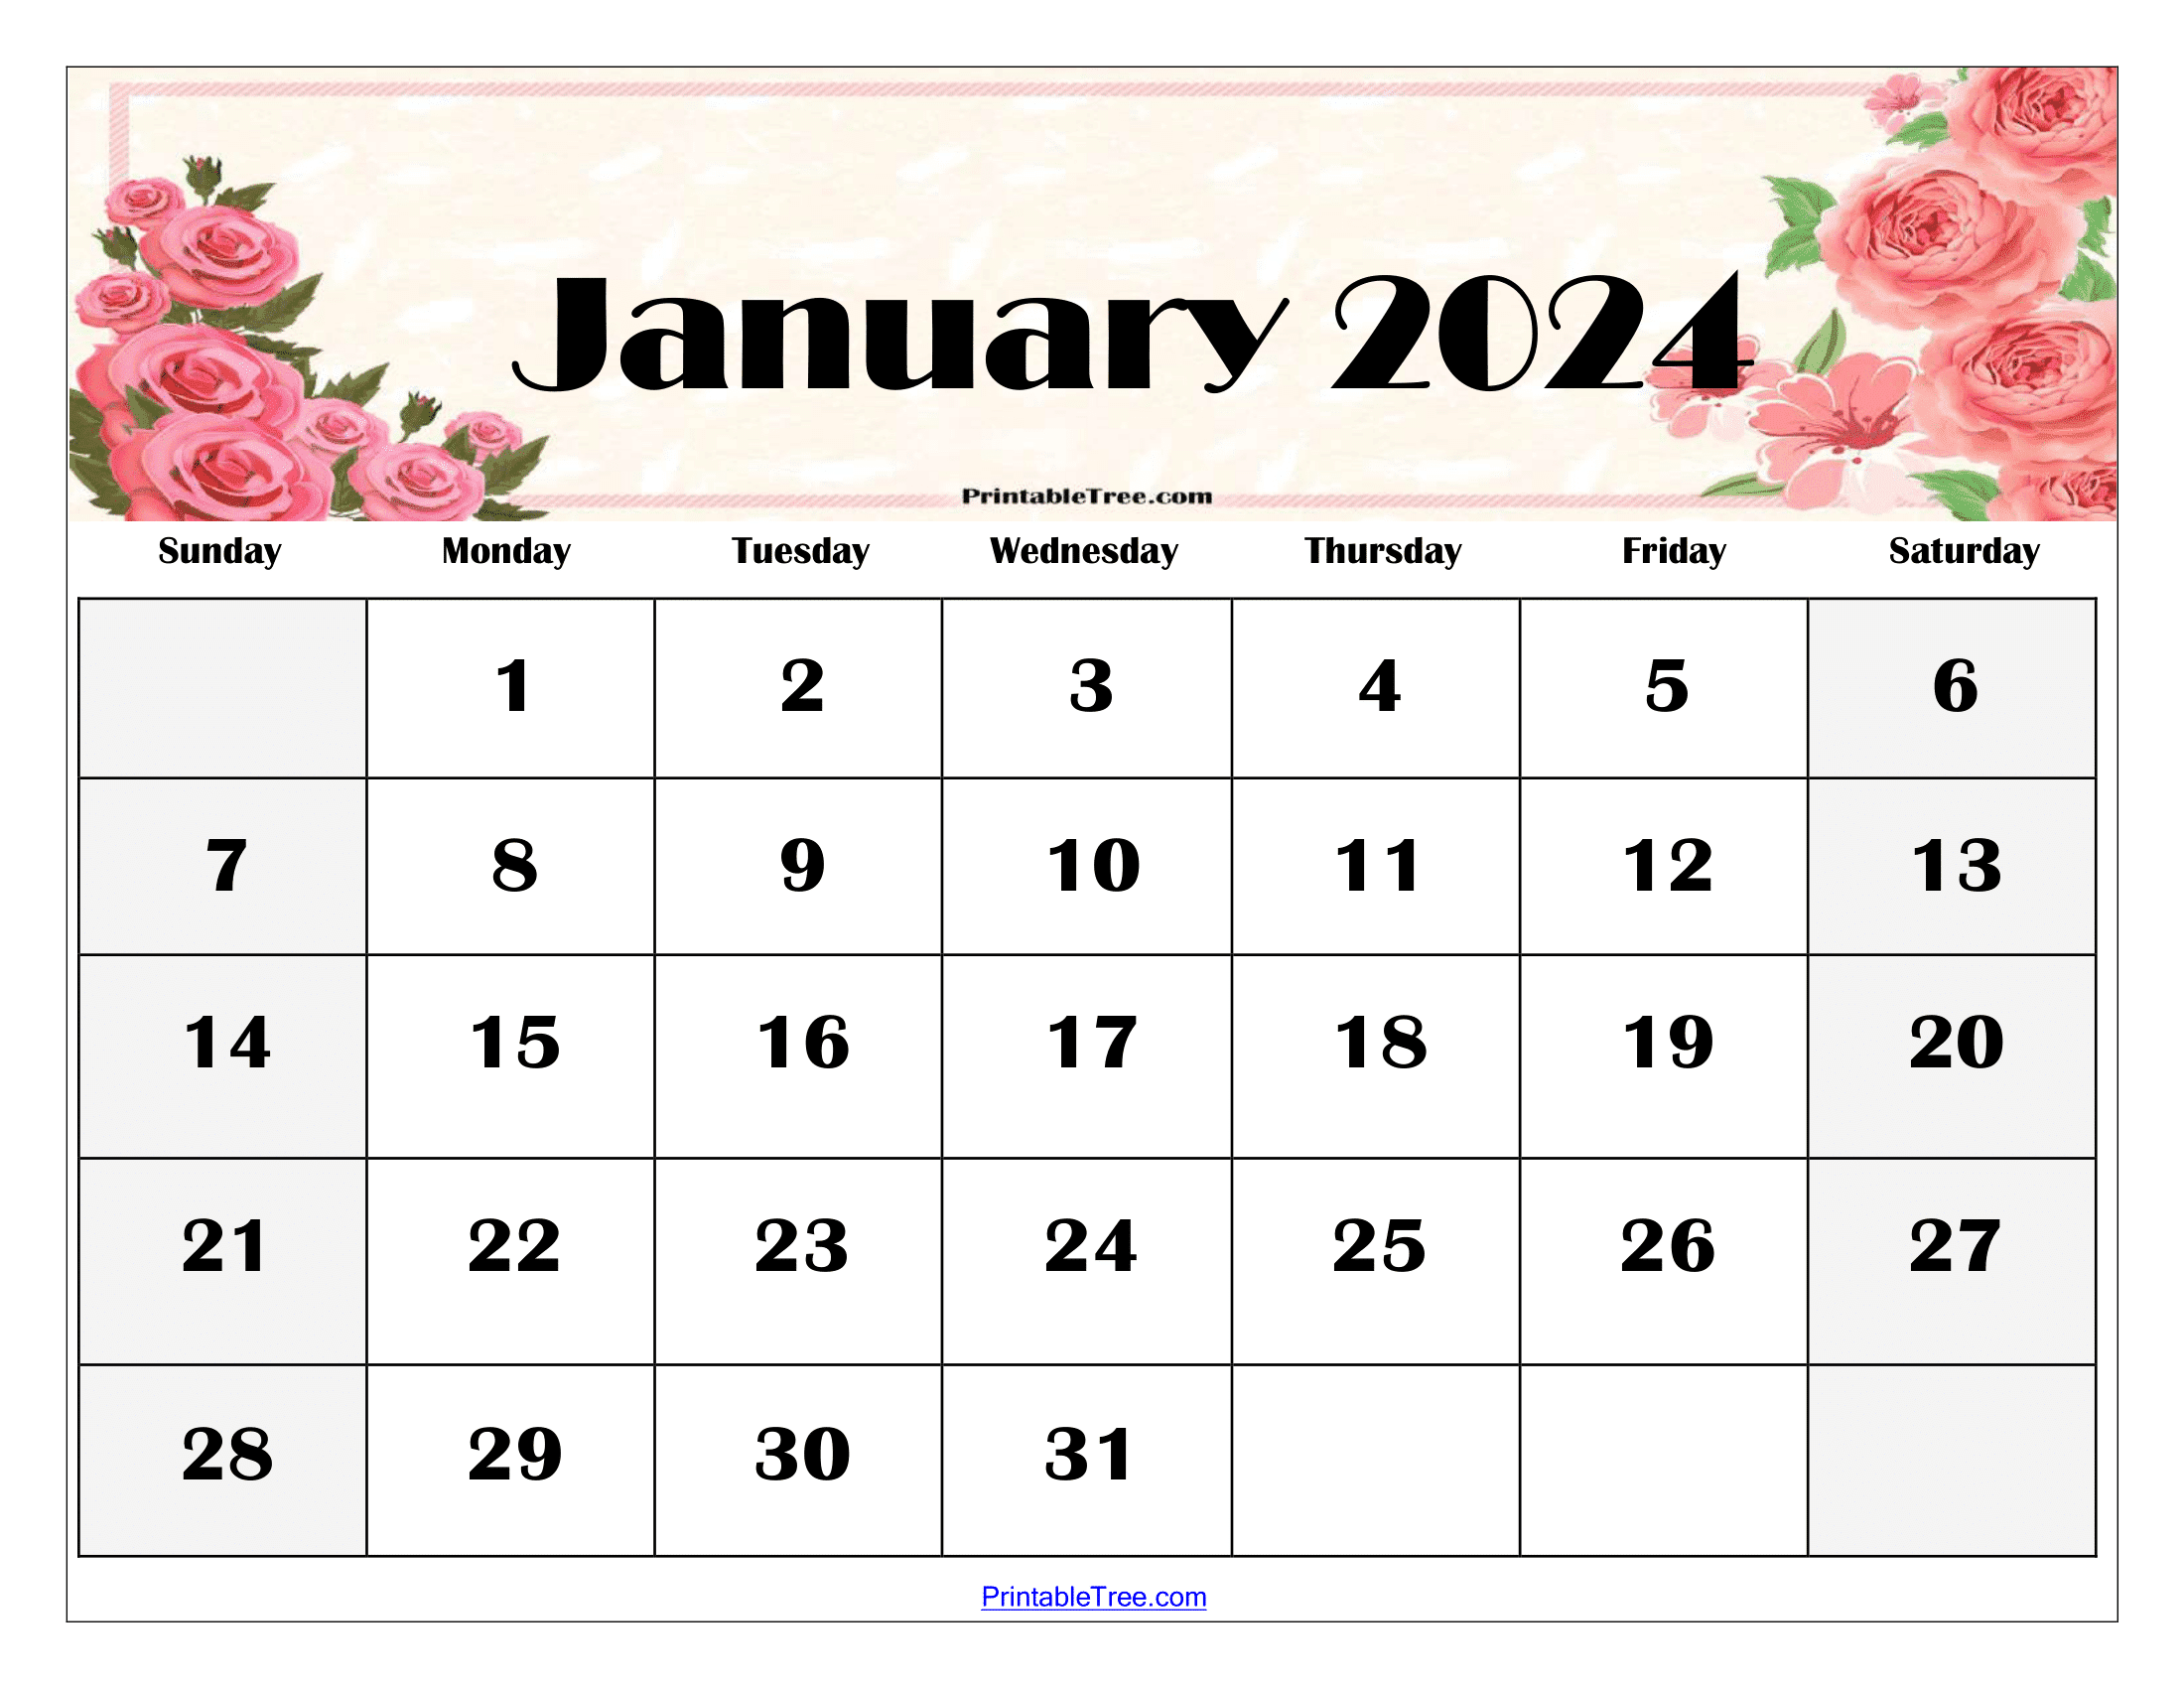 January 2024 Calendar Printable PDF Template With Holidays - Free Printable 2024 Floral Full Page Calendar